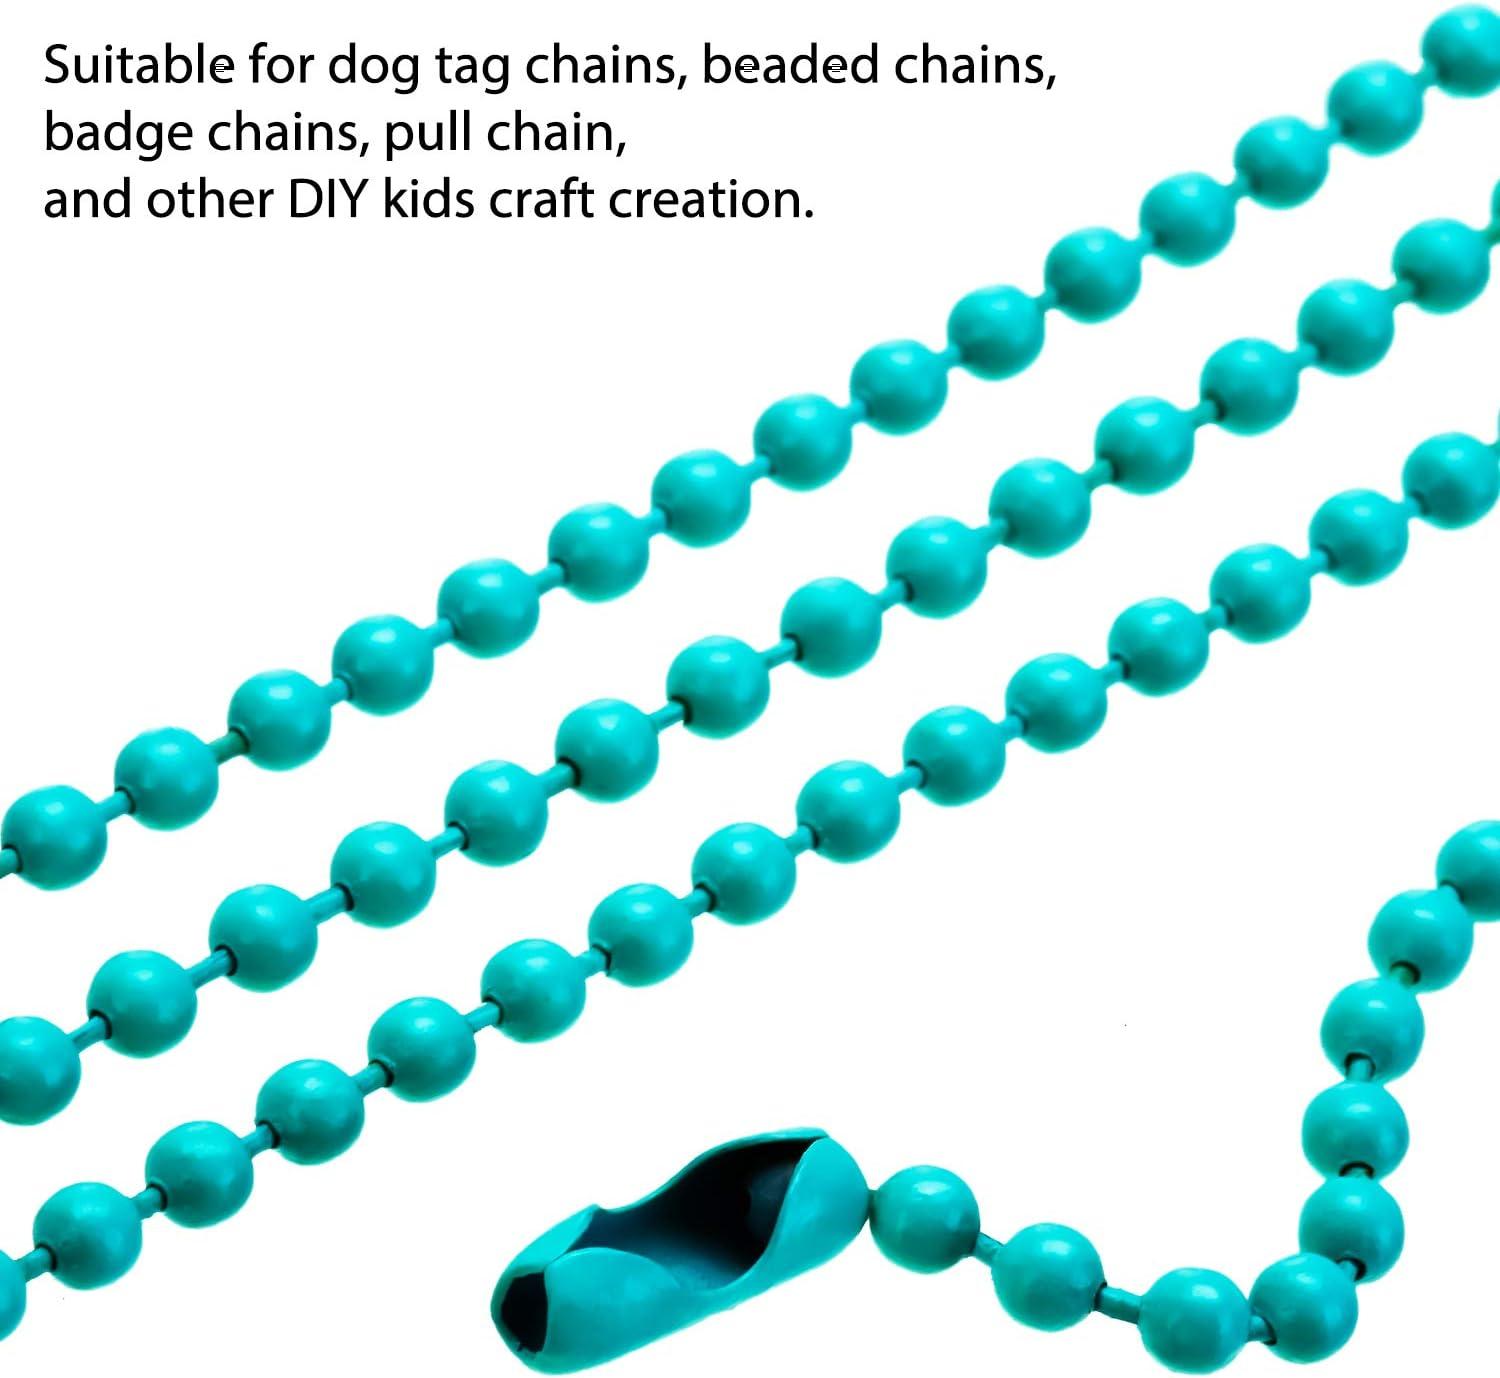  COHEALI 100pcs Keychain Jewelry Chains for Making Jewelry Dog  Tag Chains Ball and Chain Jewelry Supplies Necklace Chains Beads Chain for  Decoration Beaded Chain Key Chain Iron Accessories : Arts, Crafts